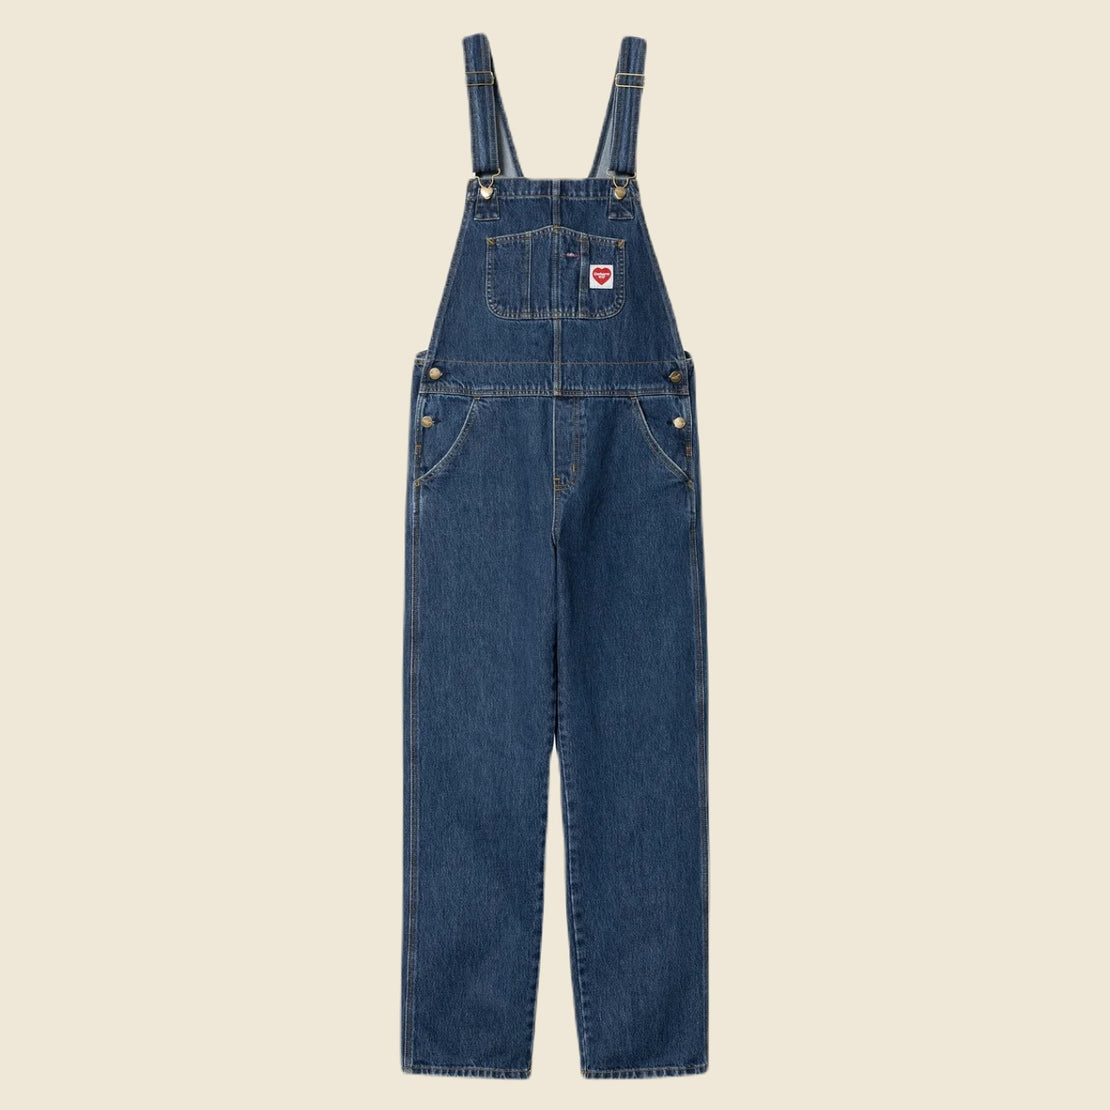 Carhartt WIP Nash Overall Straight - Blue Stone Washed